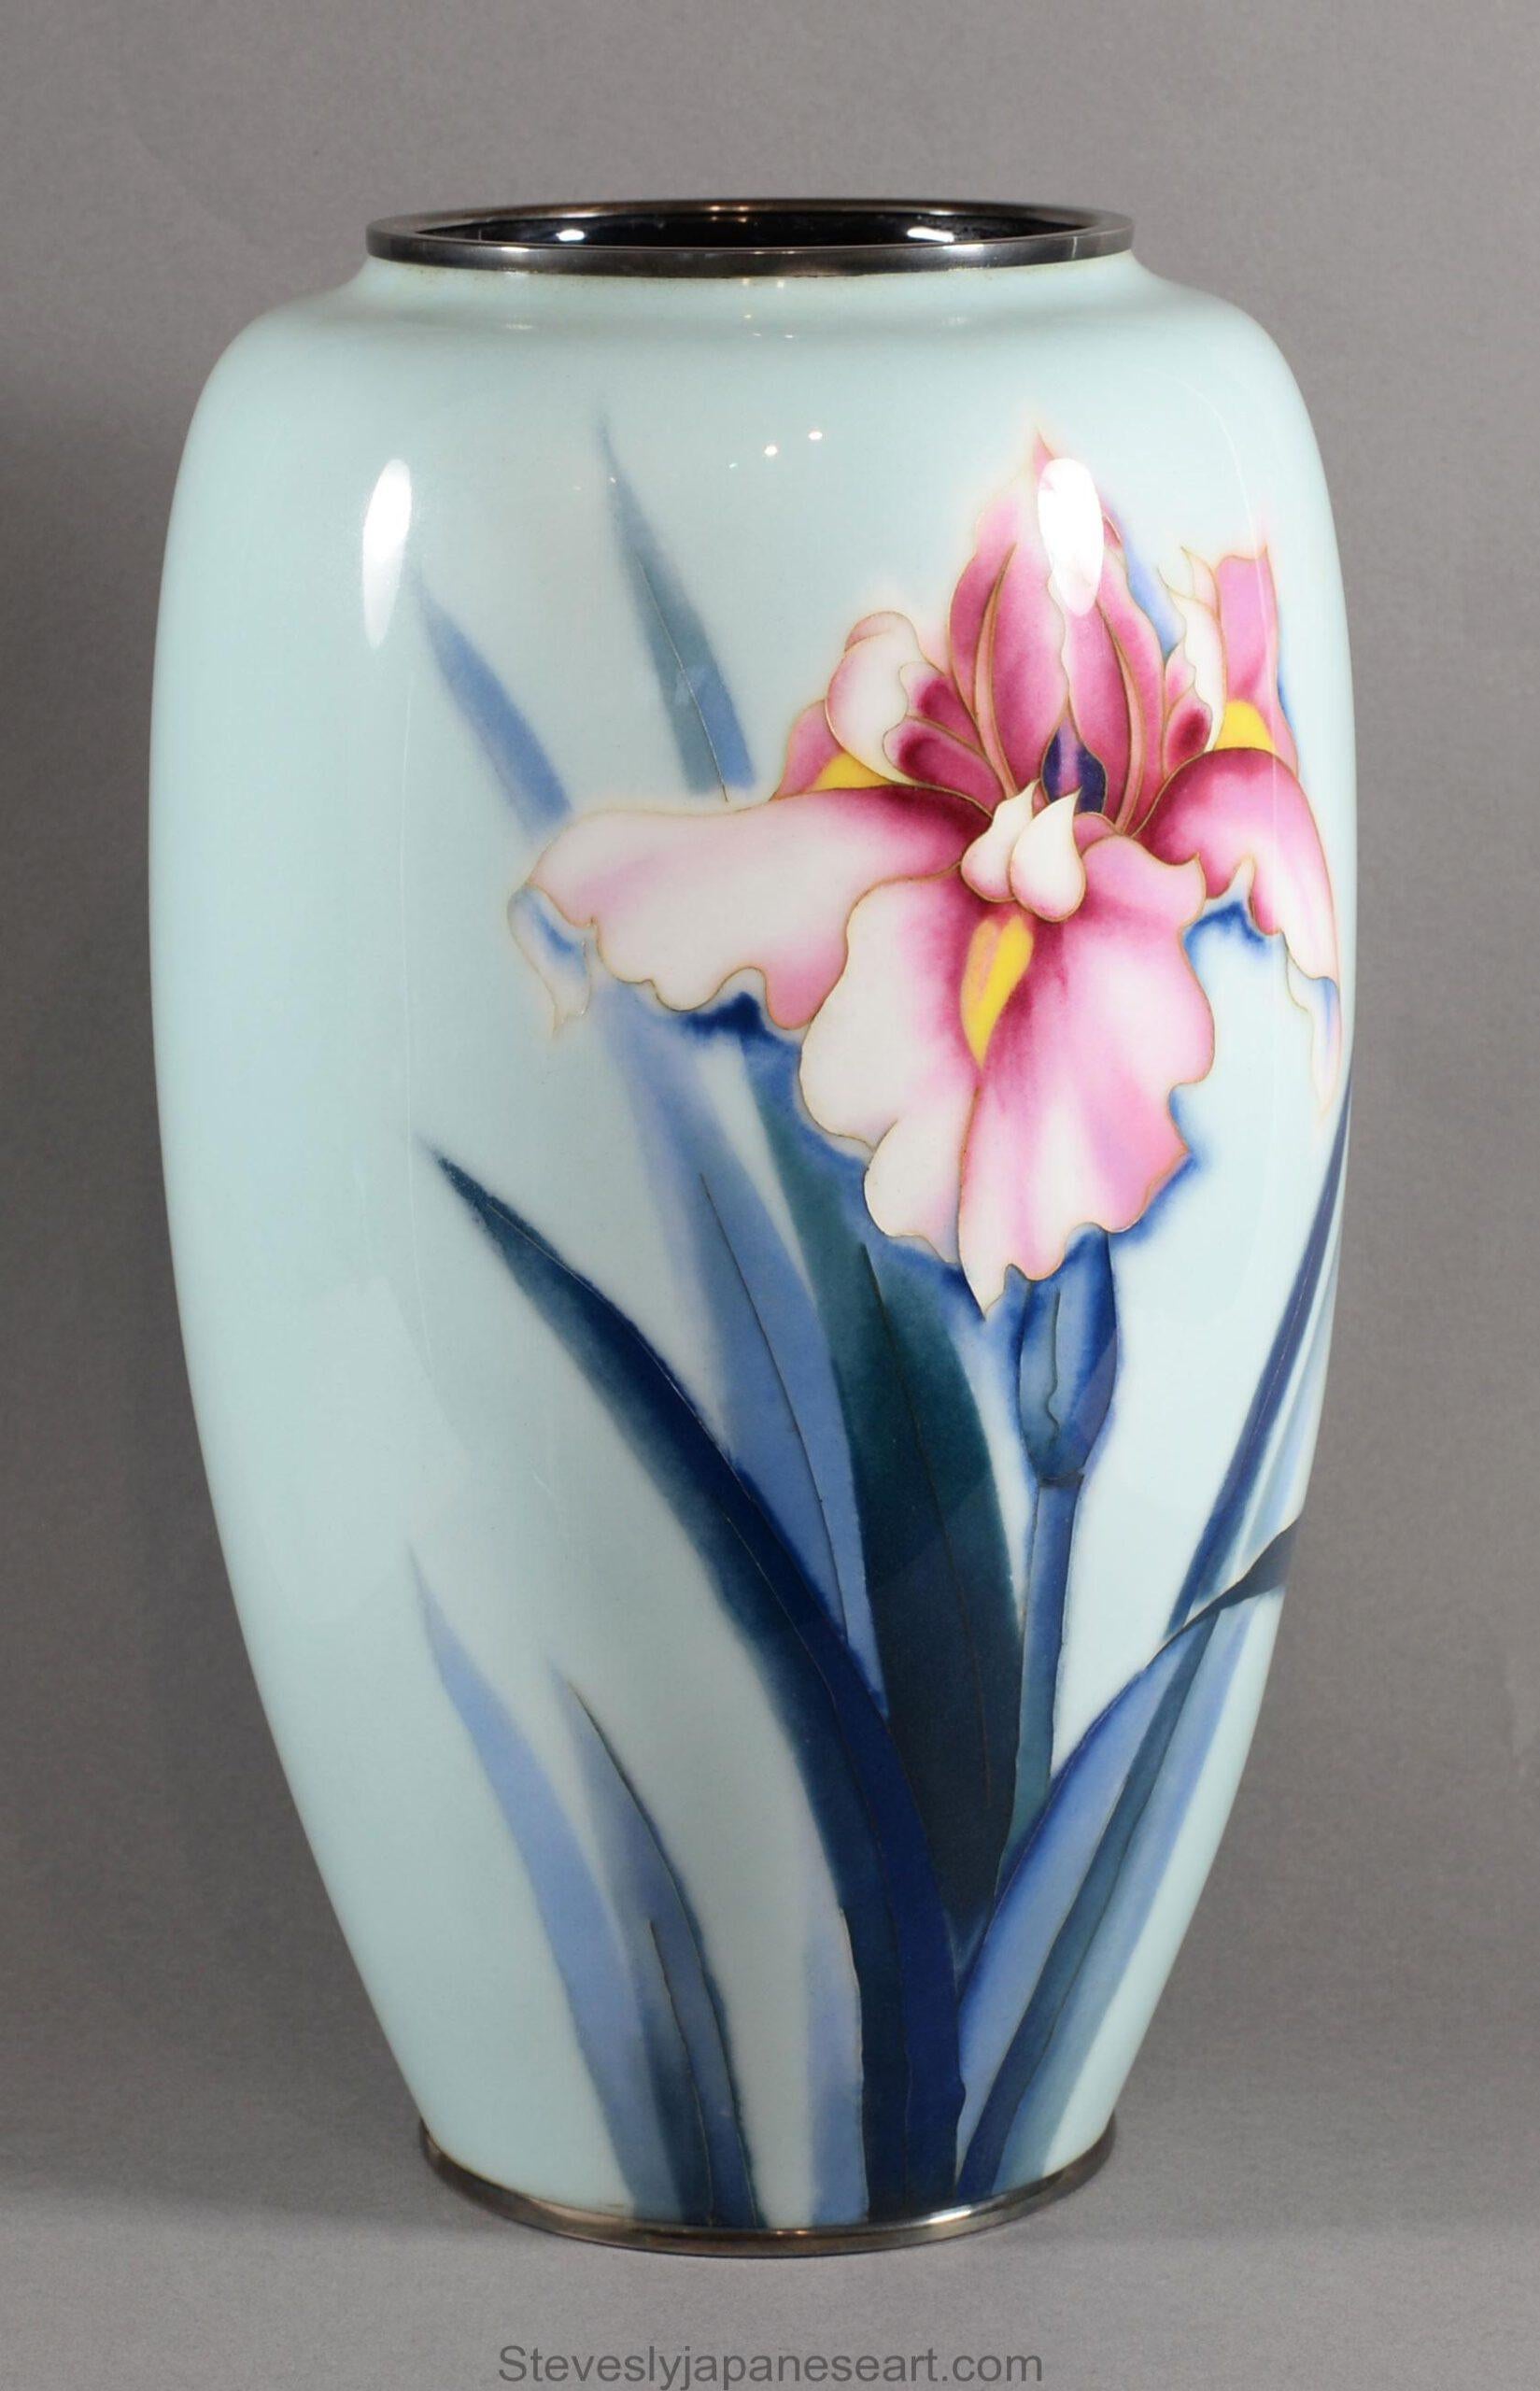 As part of our Japanese works of art collection we are delighted to offer this stunning early 20thc Meiji/Taisho period , circa 1920’s Cloisonné enamel vase by the highly regarded Ando Jubei company, this large tapered vase is predominately